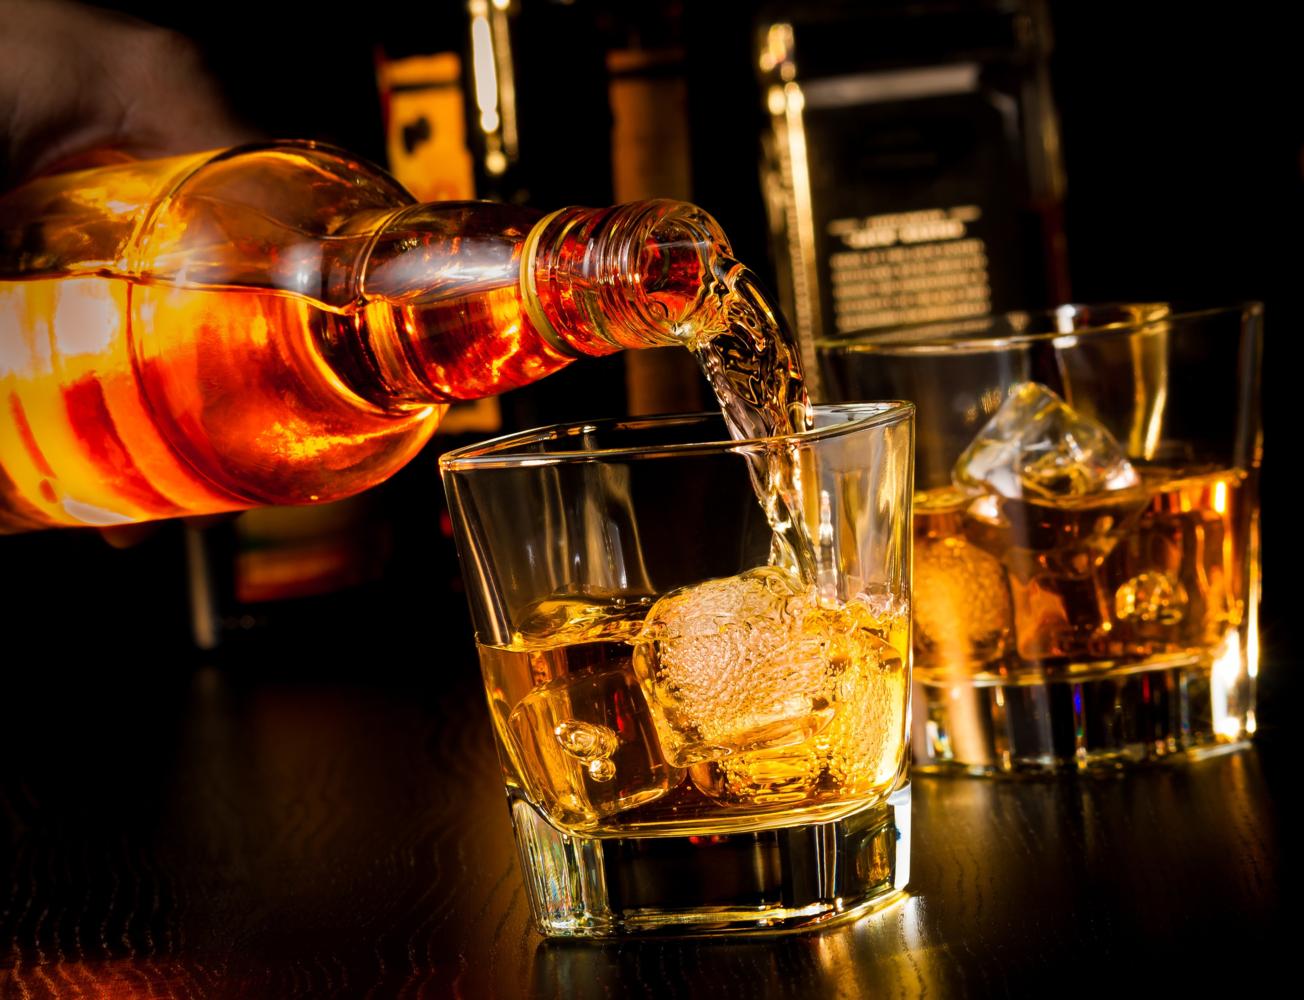 WHISKY TUMBLER IS PERFECT FOR THE WHISKY ON THE ROCKS